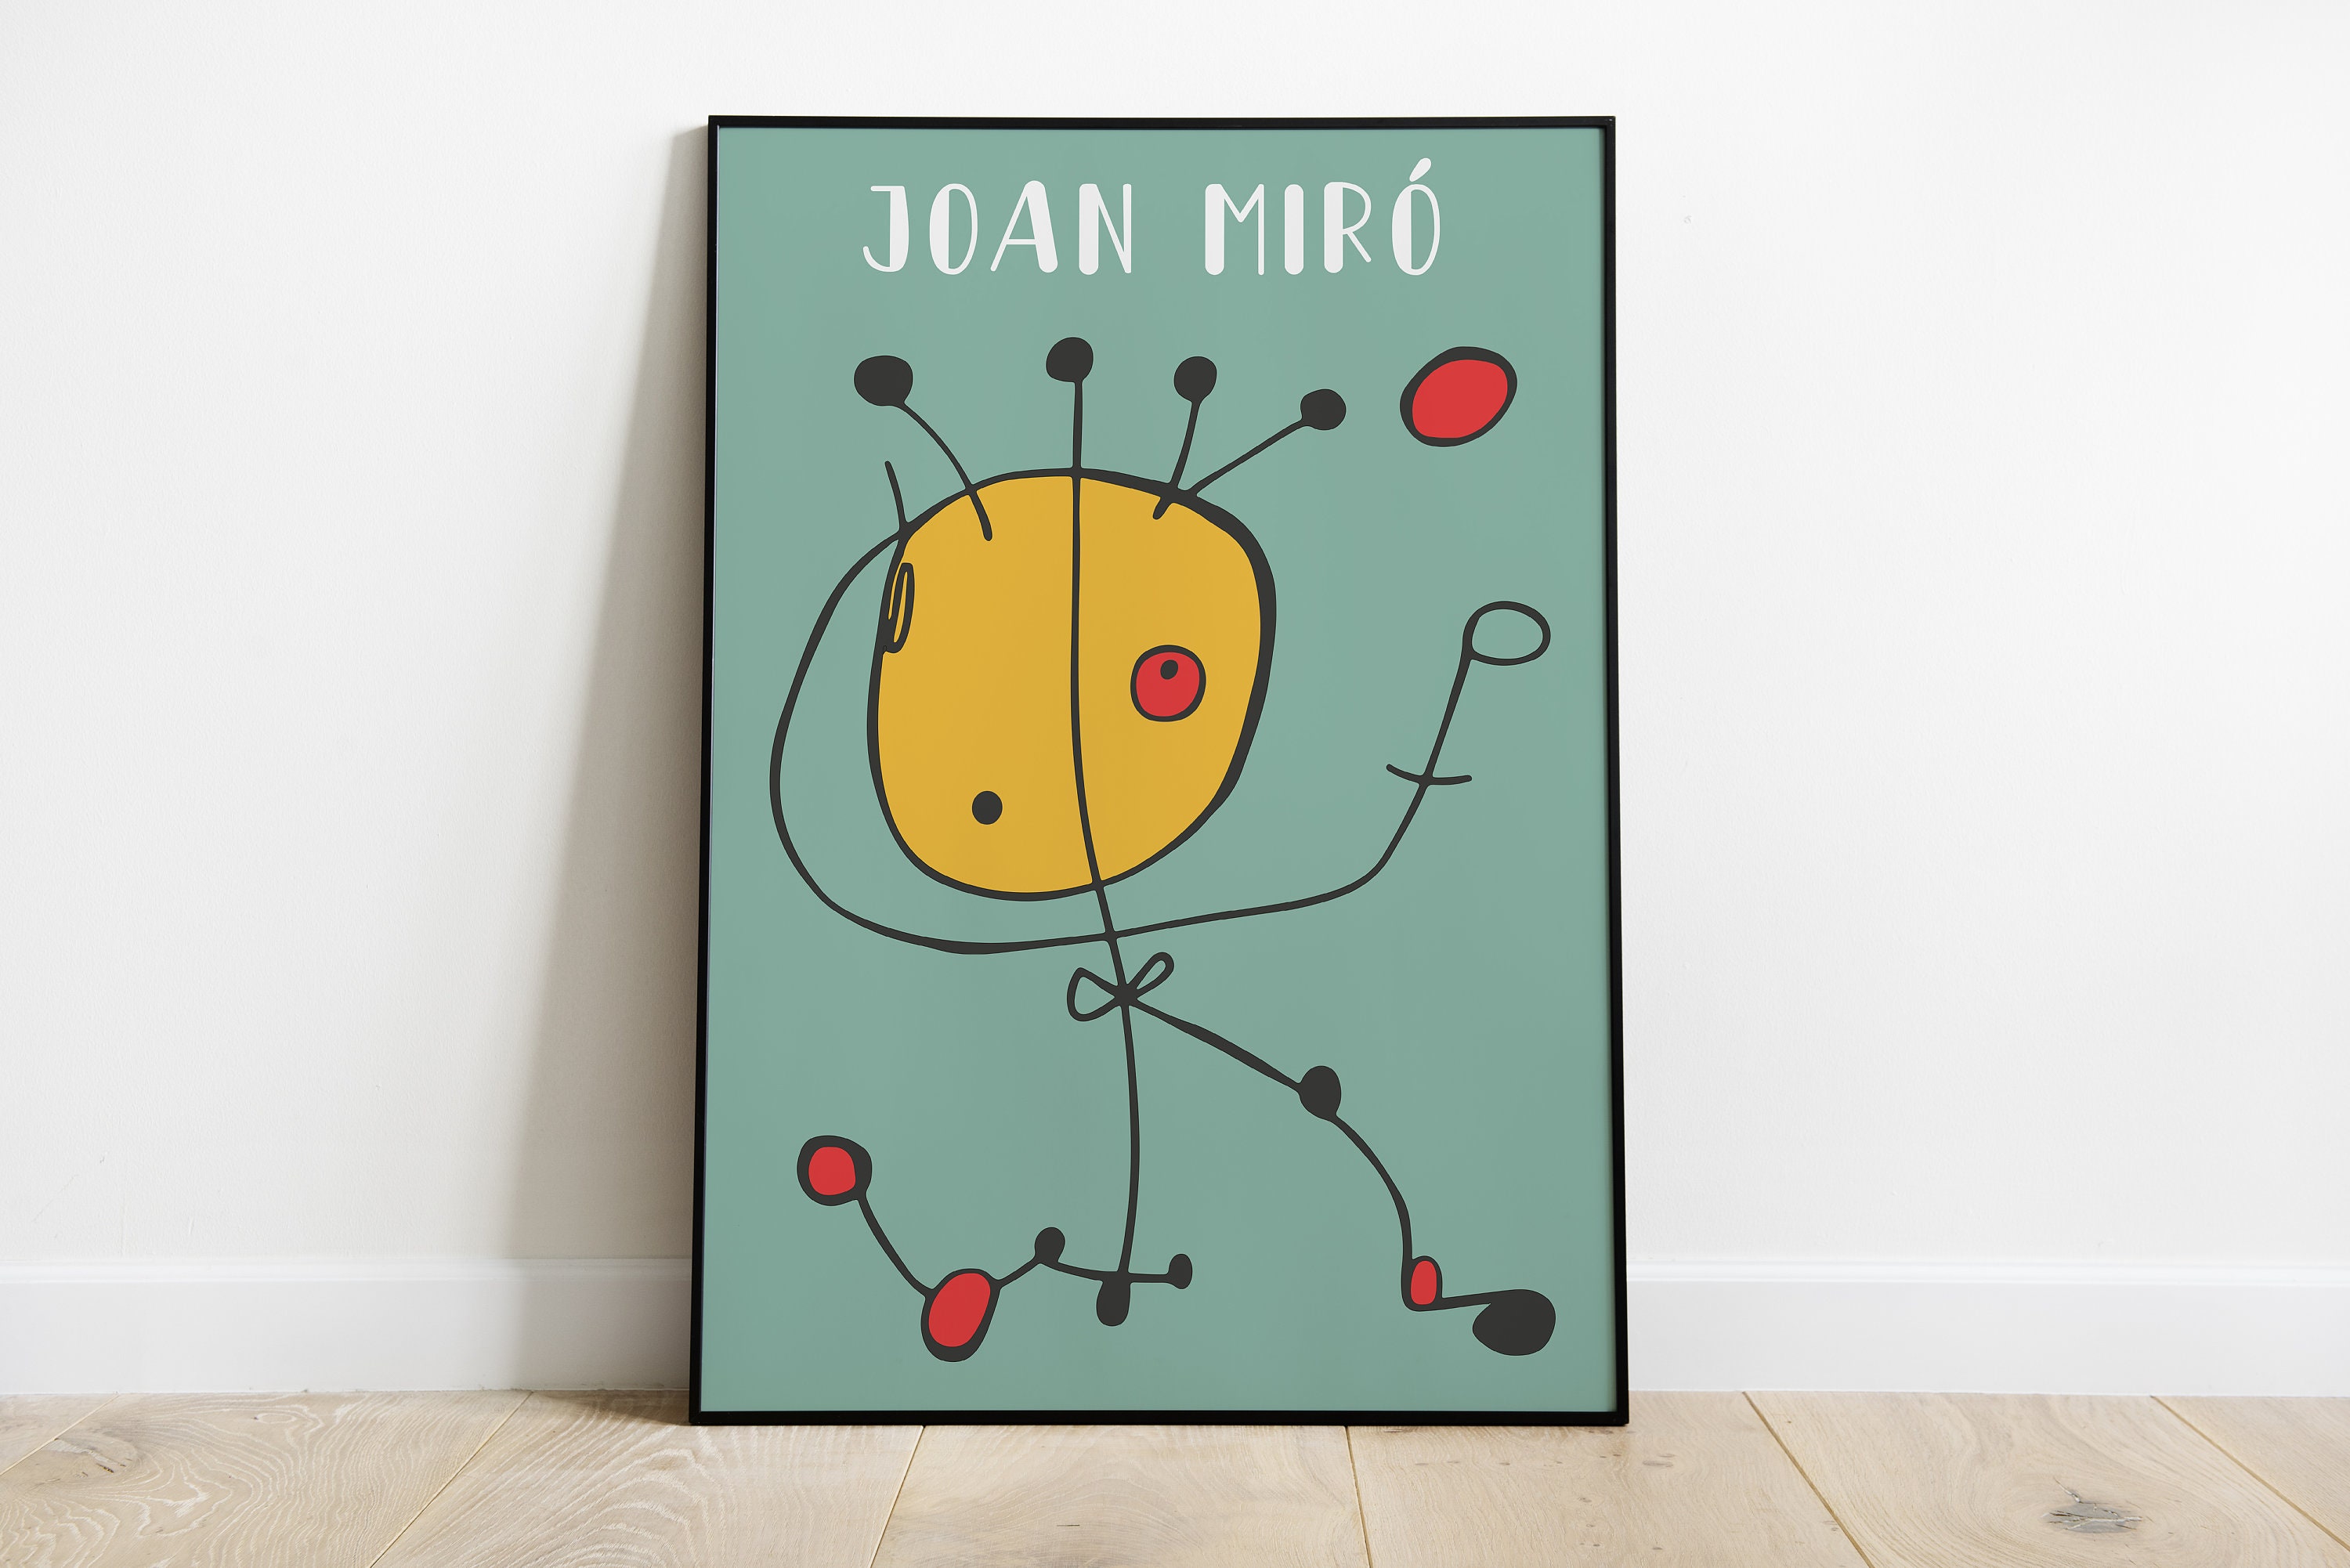 Joan Miro Puzzle Collection, Interactive Arts Puzzle Game for Kids